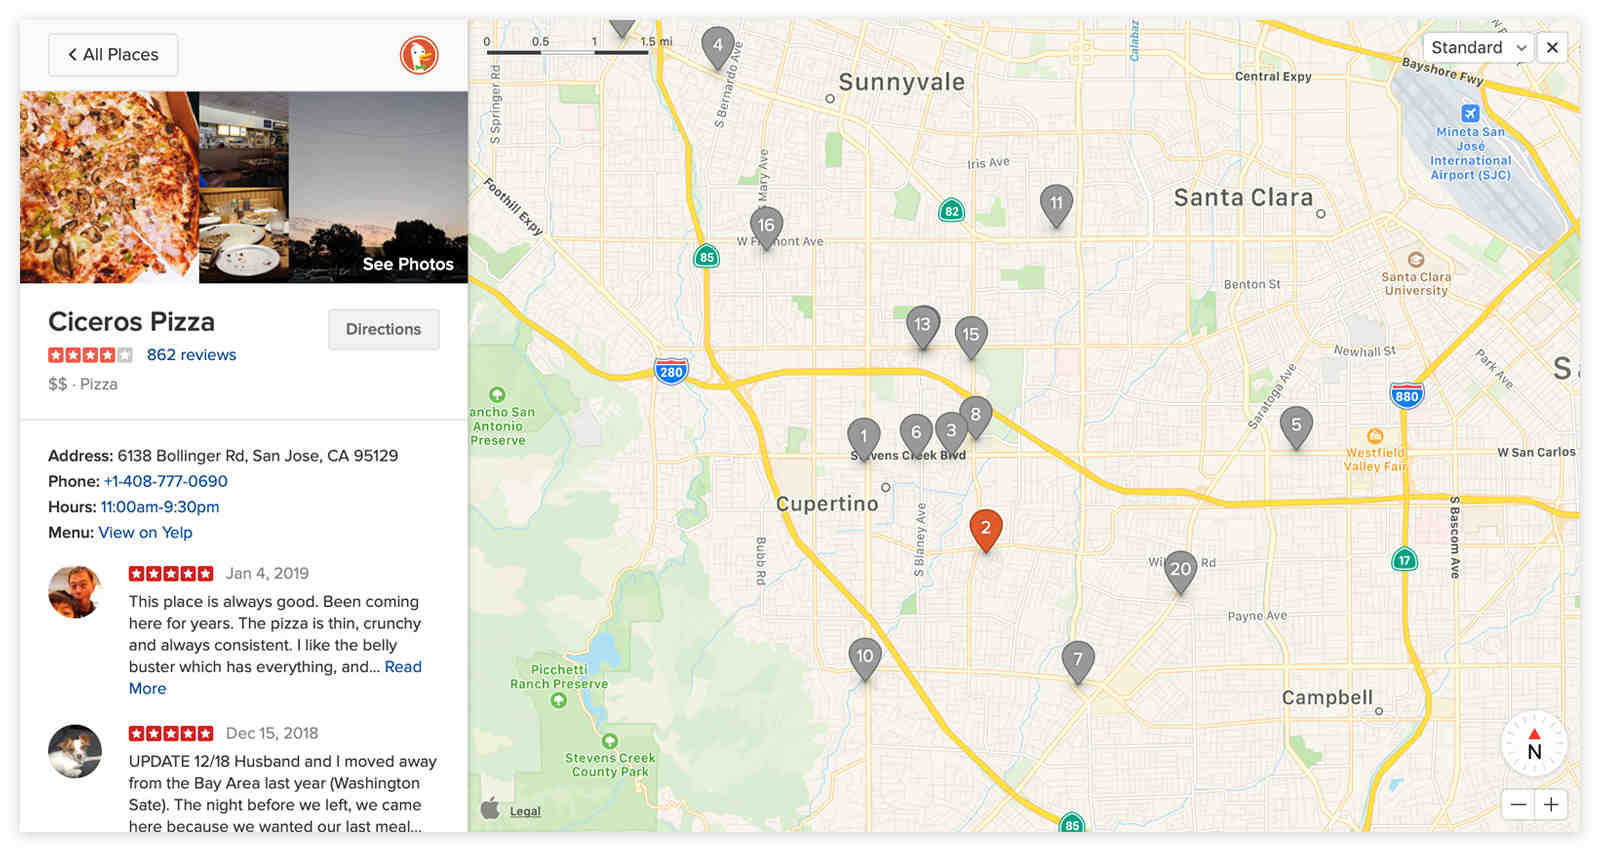 DuckDuckGo for mobile and desktop are now powered by Apple's MapKit JS framework. Image: DuckDuckGo